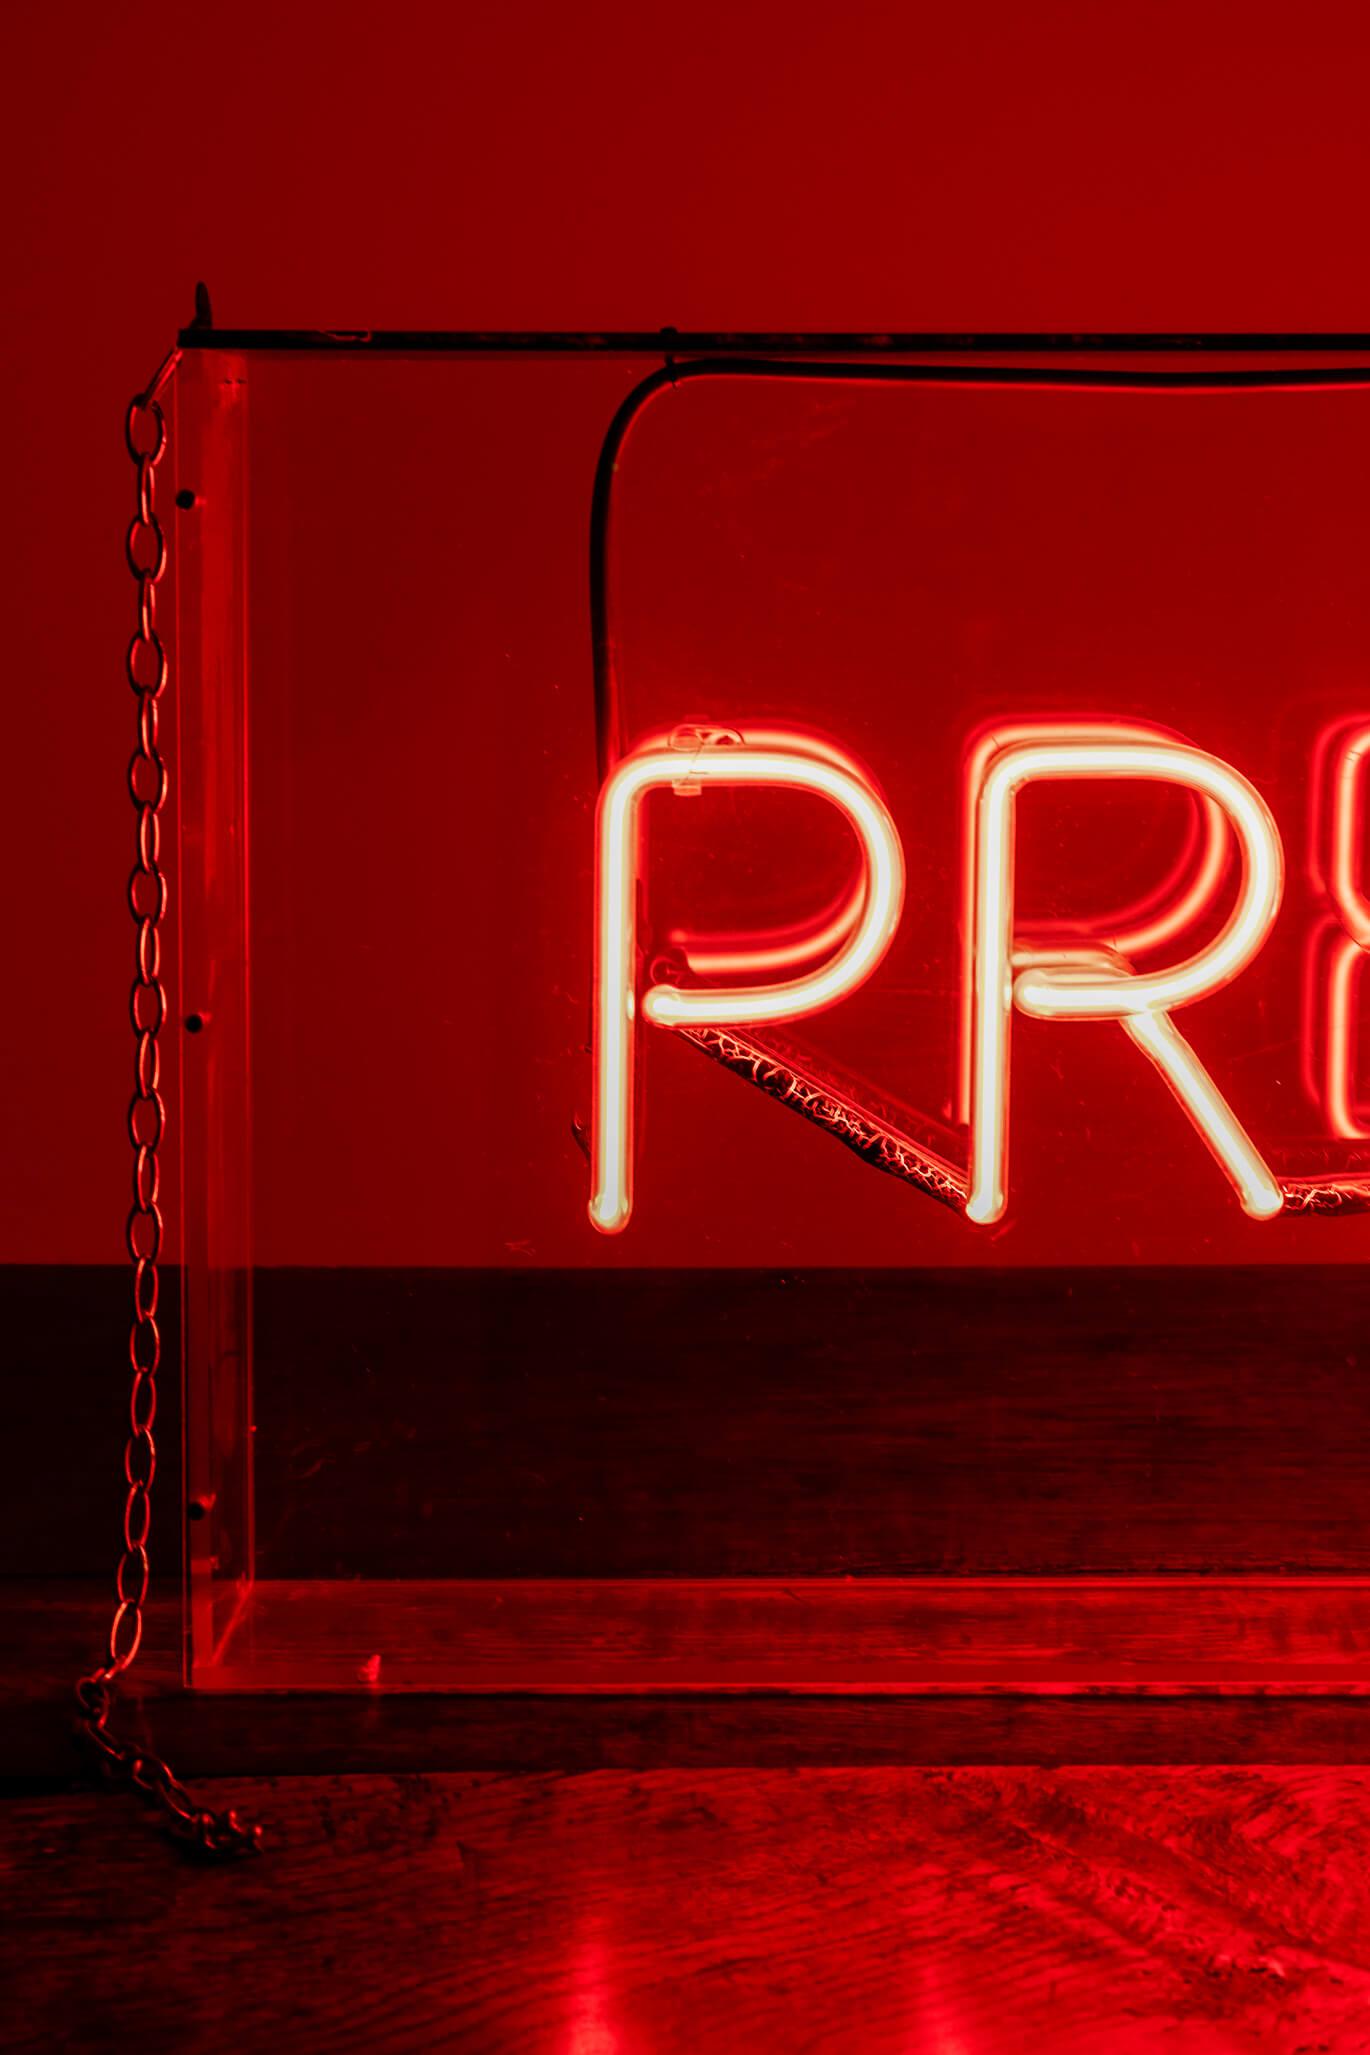 A commanding vintage neon chemist sign in a perspex box that reads ‘prescriptions’ once illuminated. 
Support chains are included on either side of the perspex box. Great size and presence. 
English, 20th century.

Additional information:
H 40